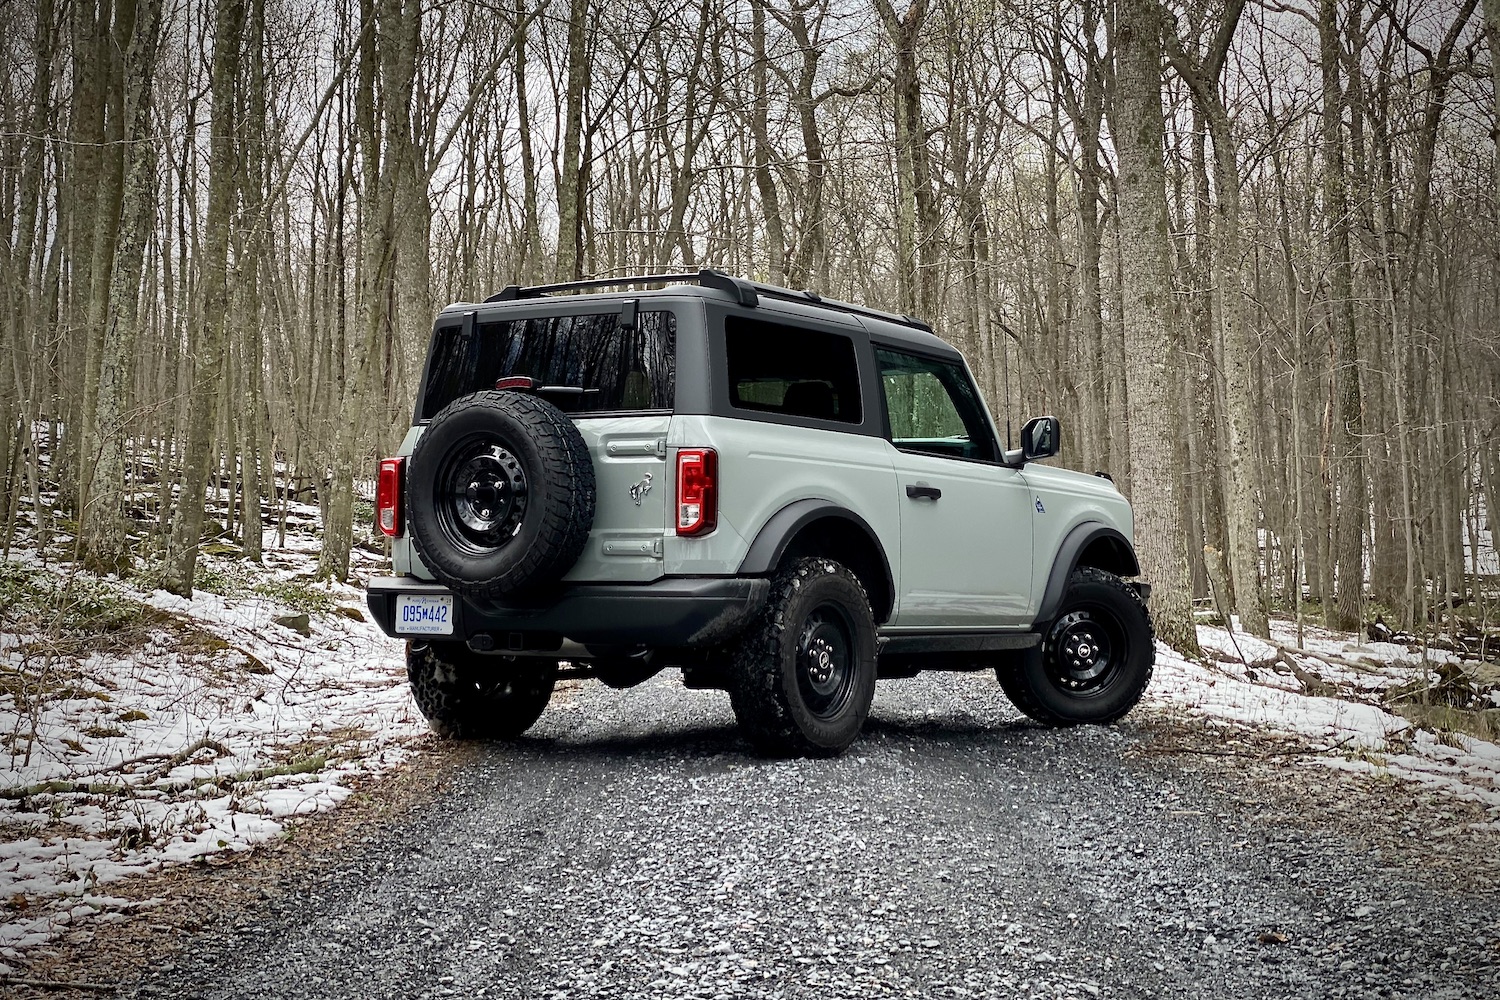 2021 Ford Bronco rear end angle from passenger side on a gravel trail in front of bare trees with snow on the ground.